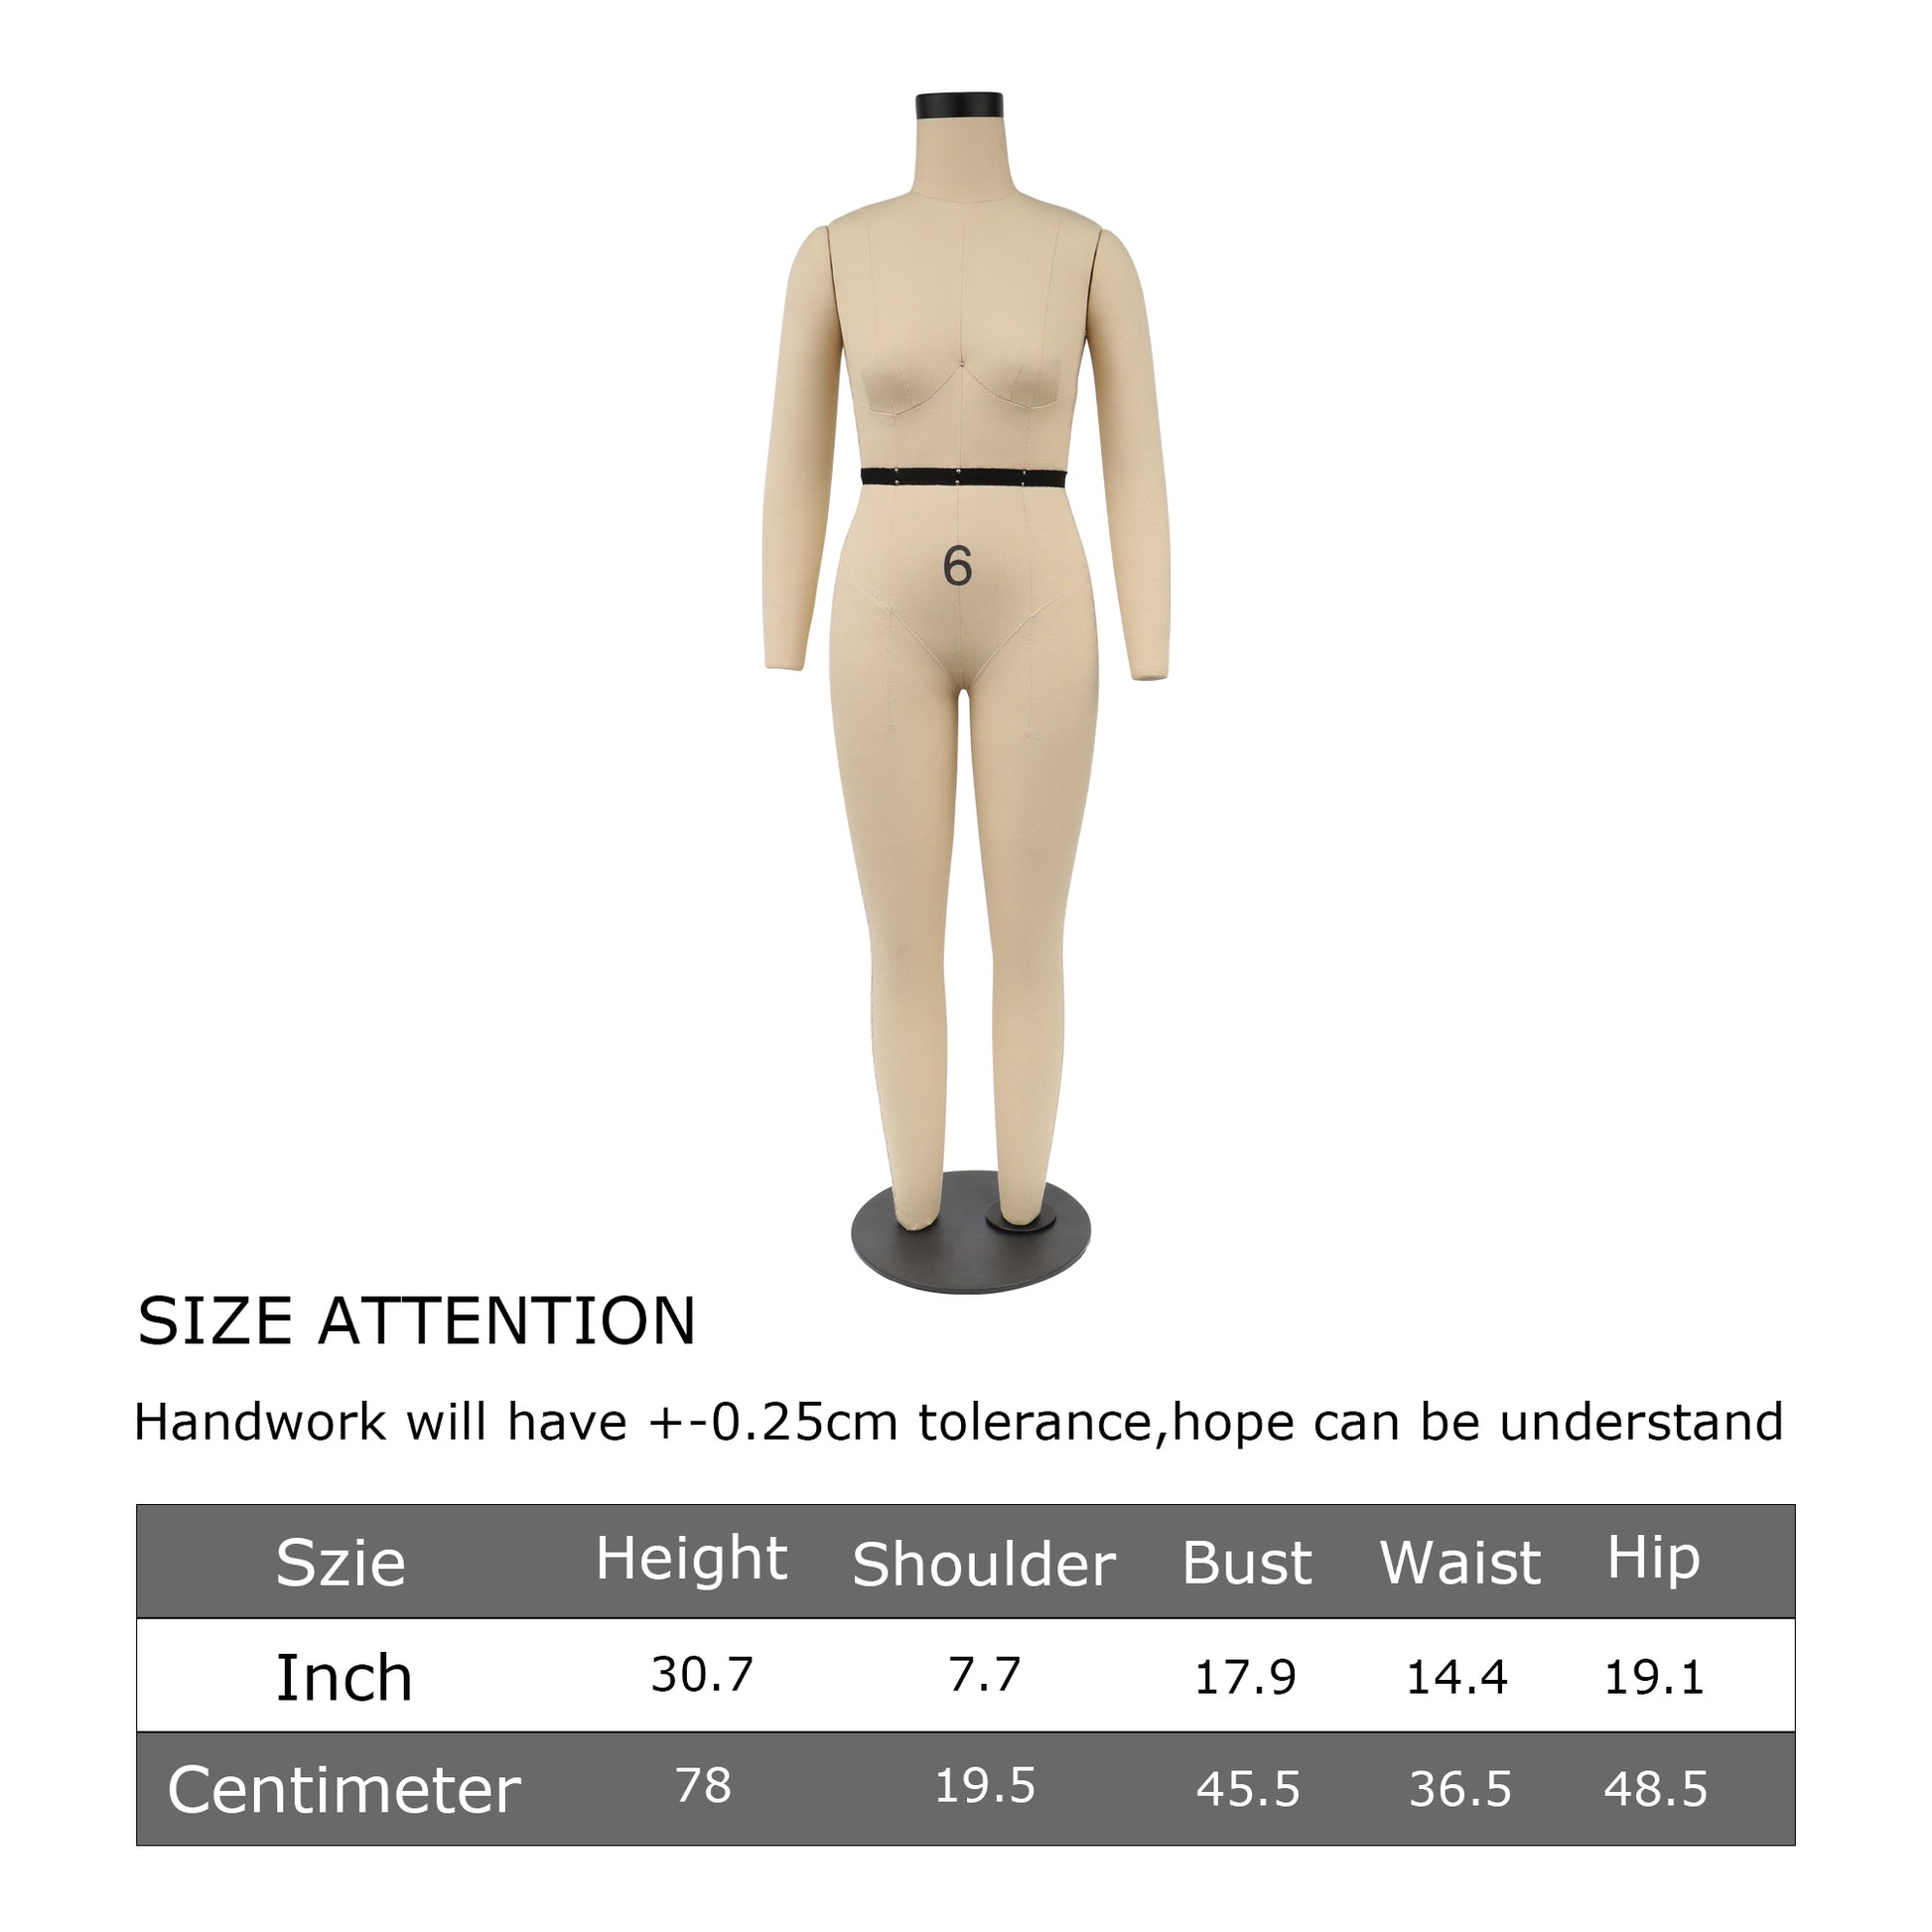 DL265 Half Scale dress form full body, US size 6 1/2 scale tailoring dummy,Sewing Dressmaker Mannequin with Detachable Arms DE-LIANG